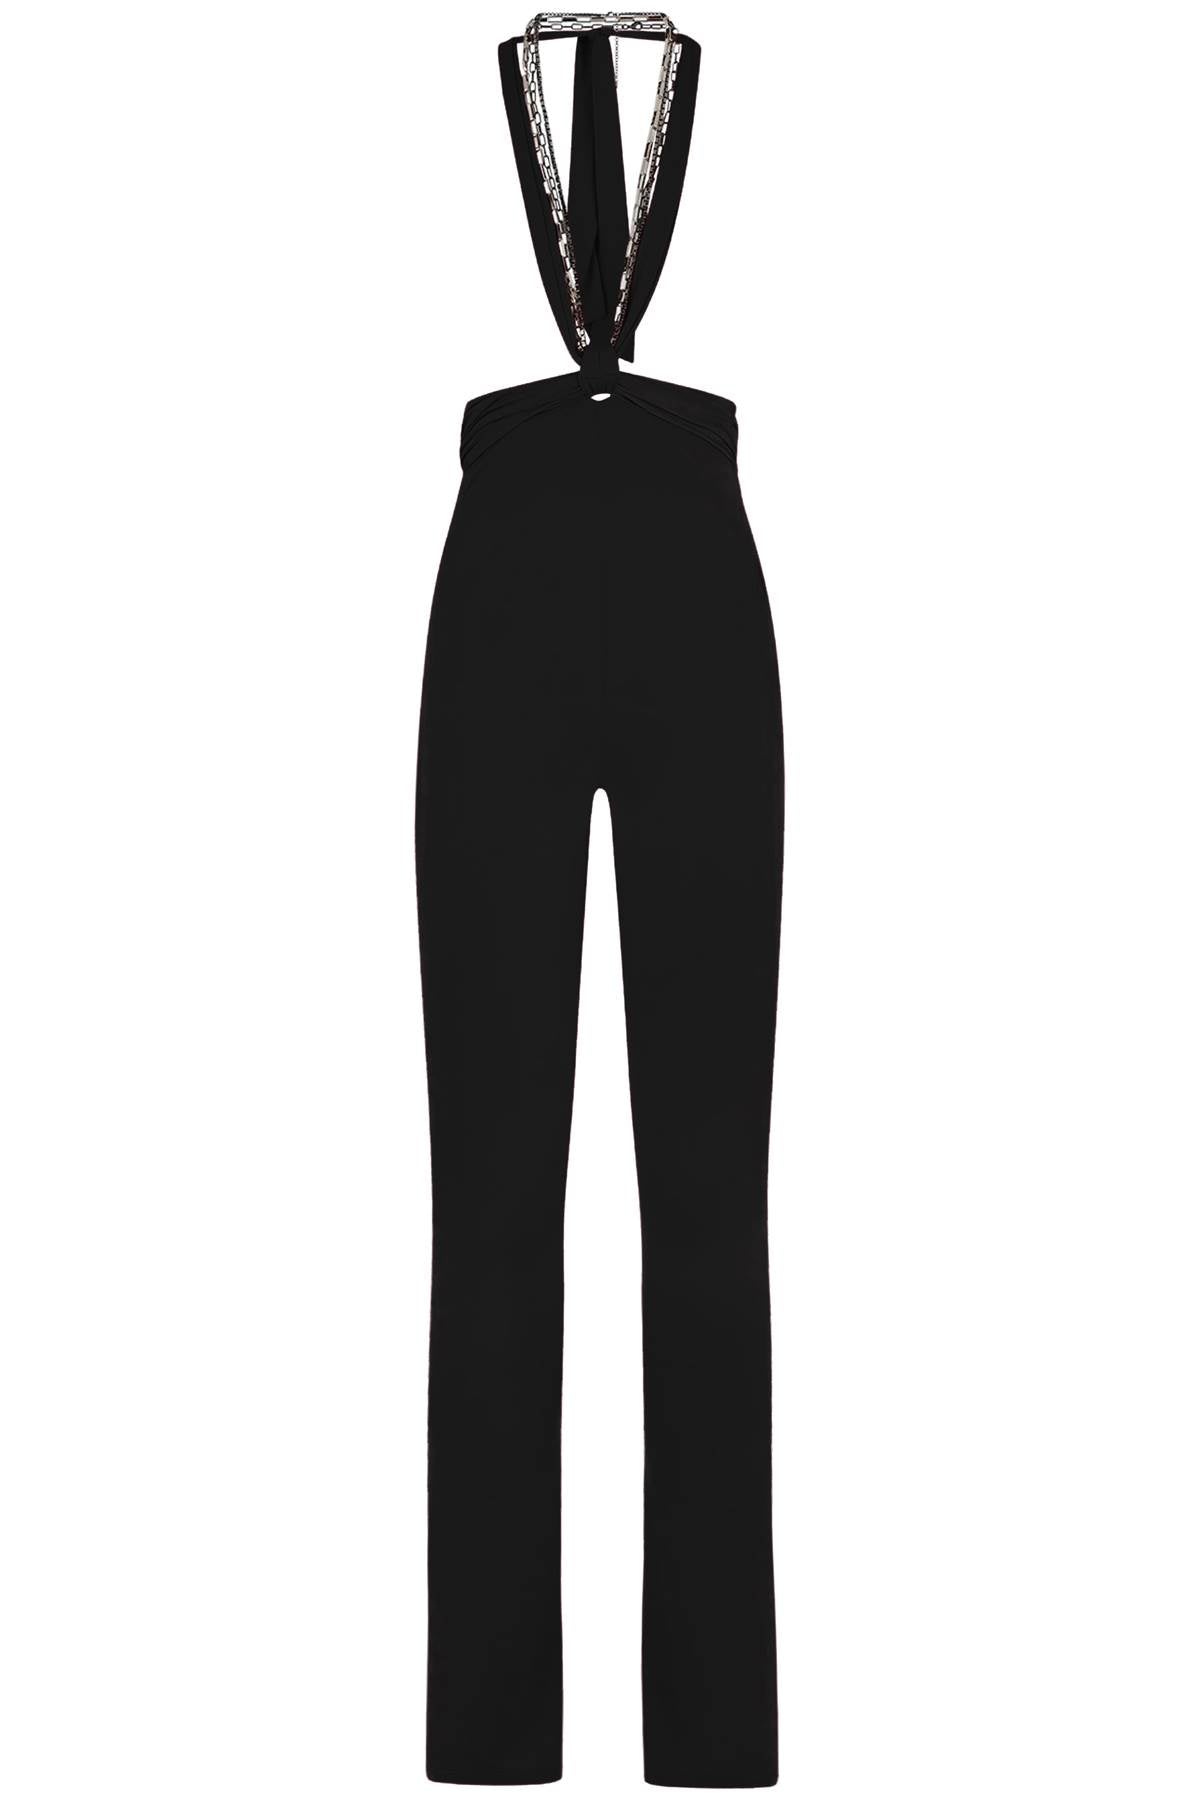 THE ATTICO Draped High-Waisted Pants with Self-Tied Chains and Bow for Women